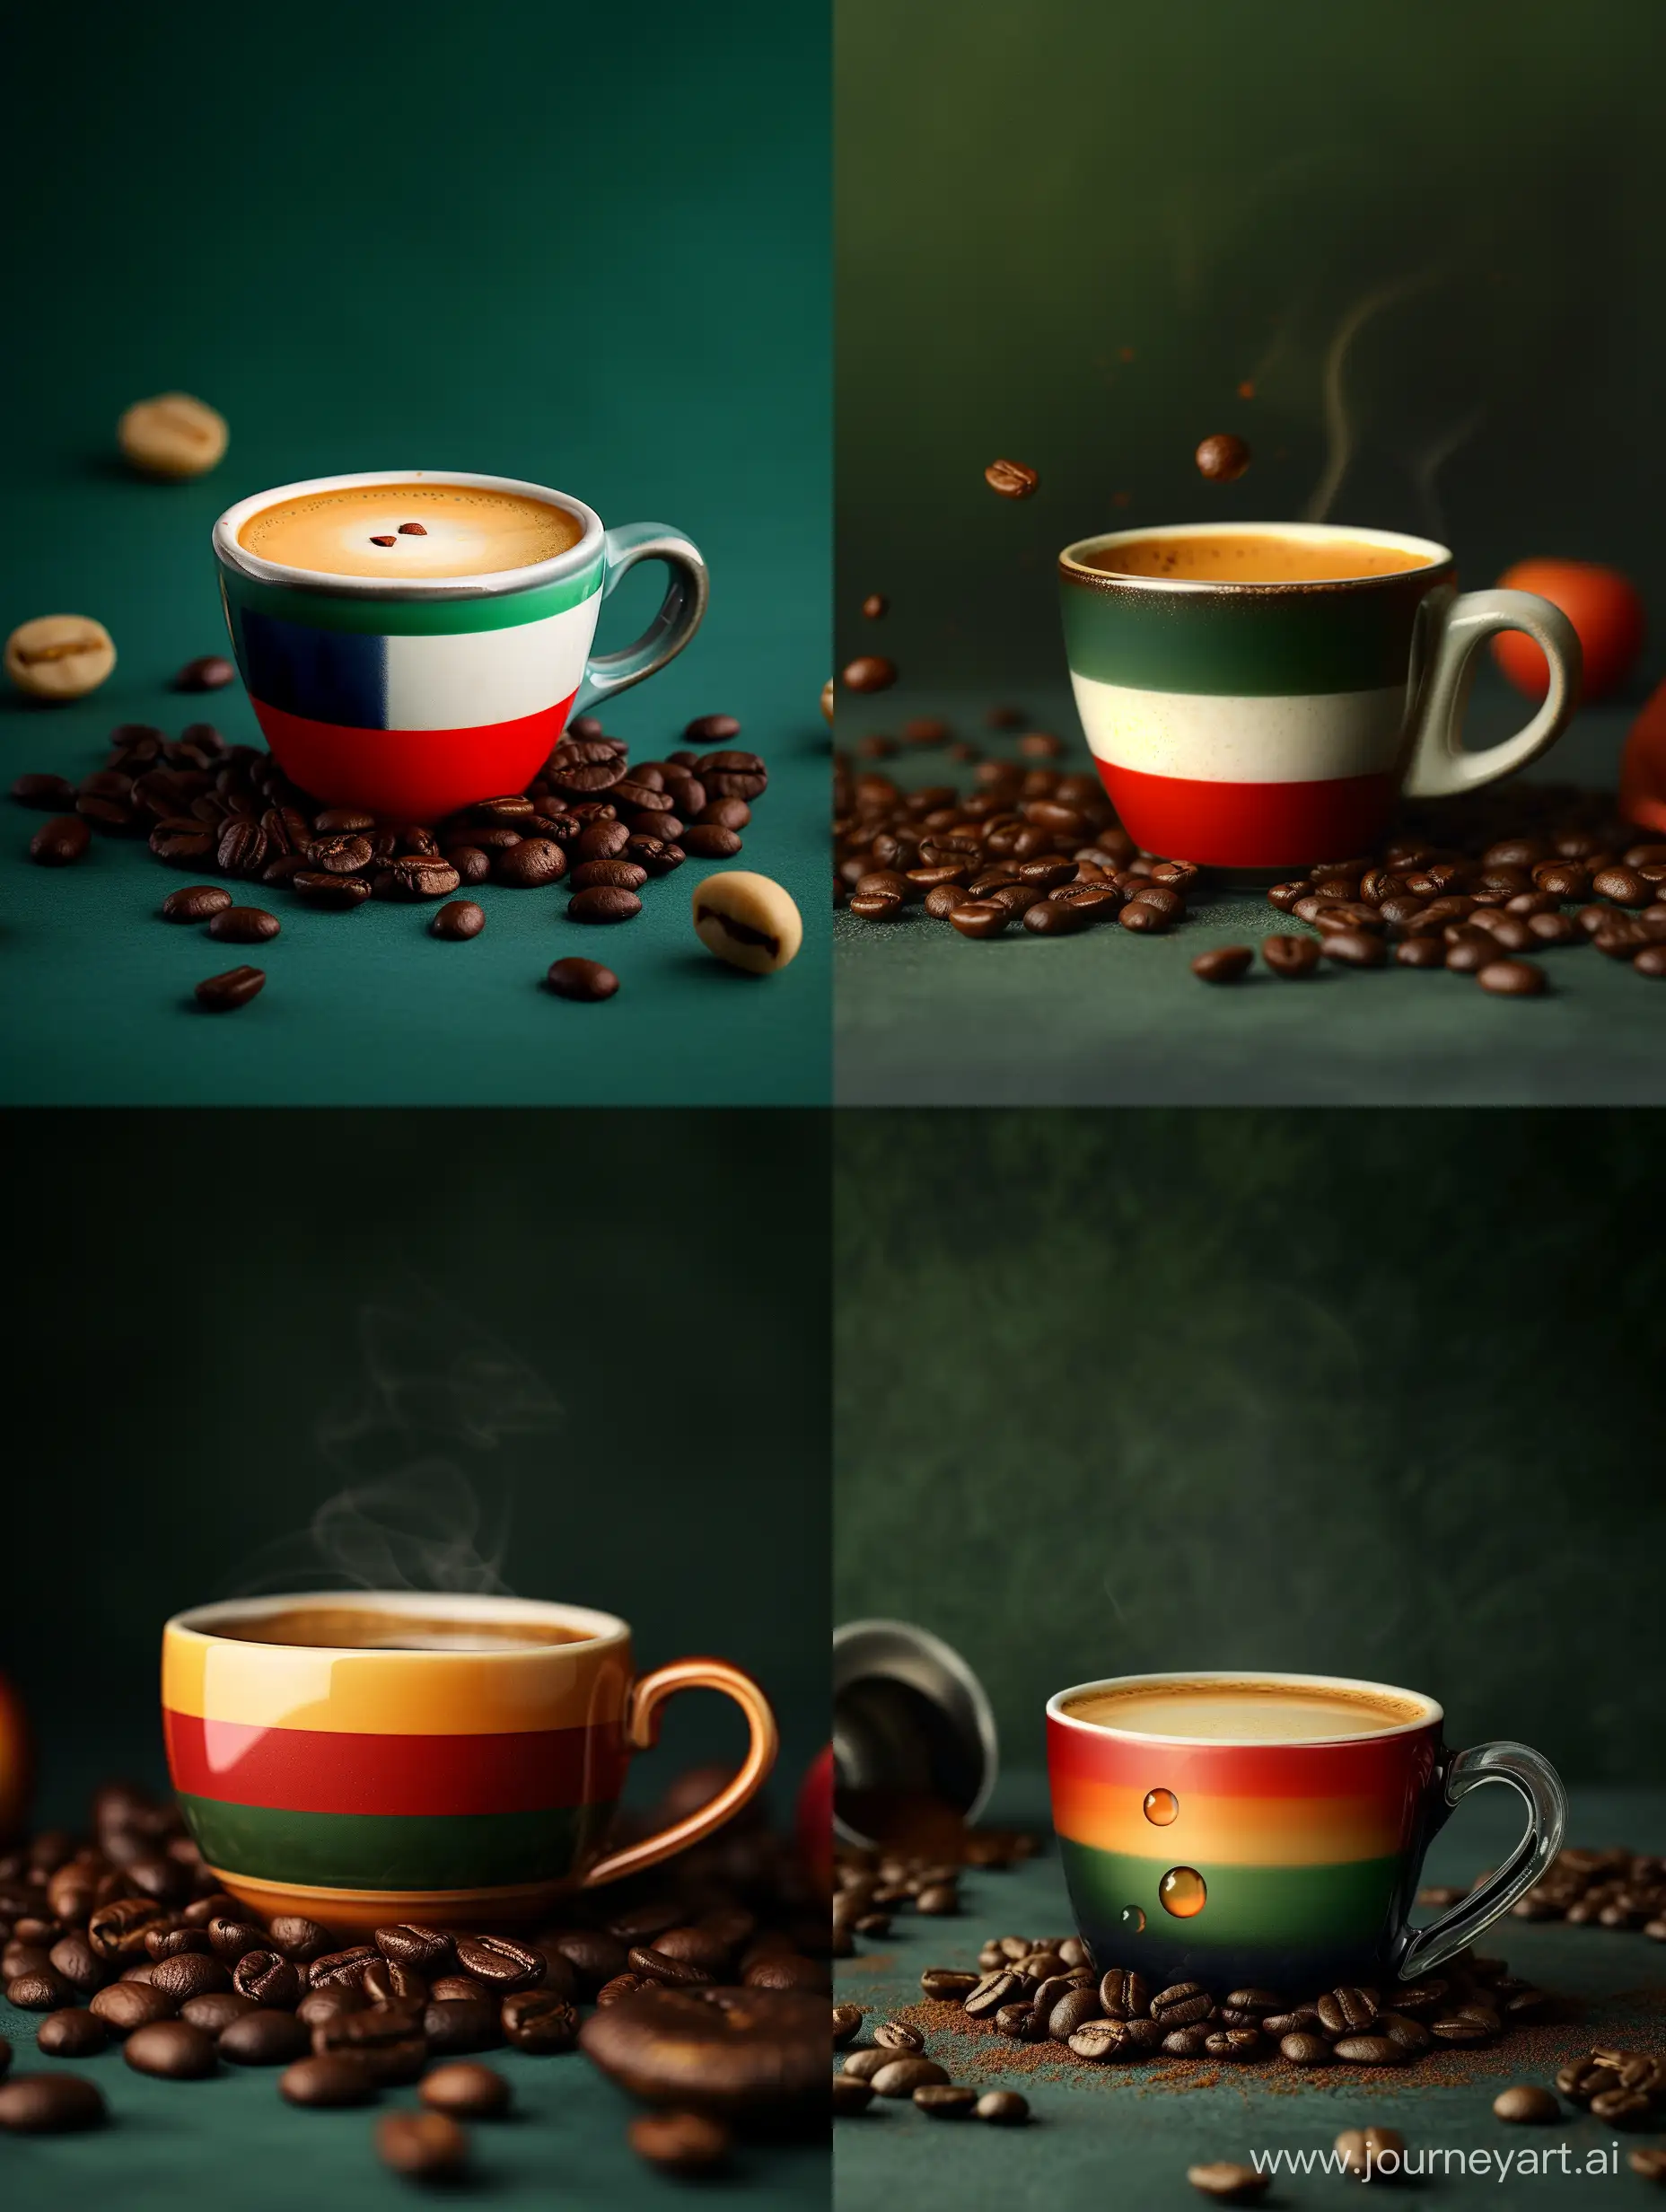 Aromatic-Italian-Flag-Coffee-Cup-with-Beans-on-Dark-Green-Background